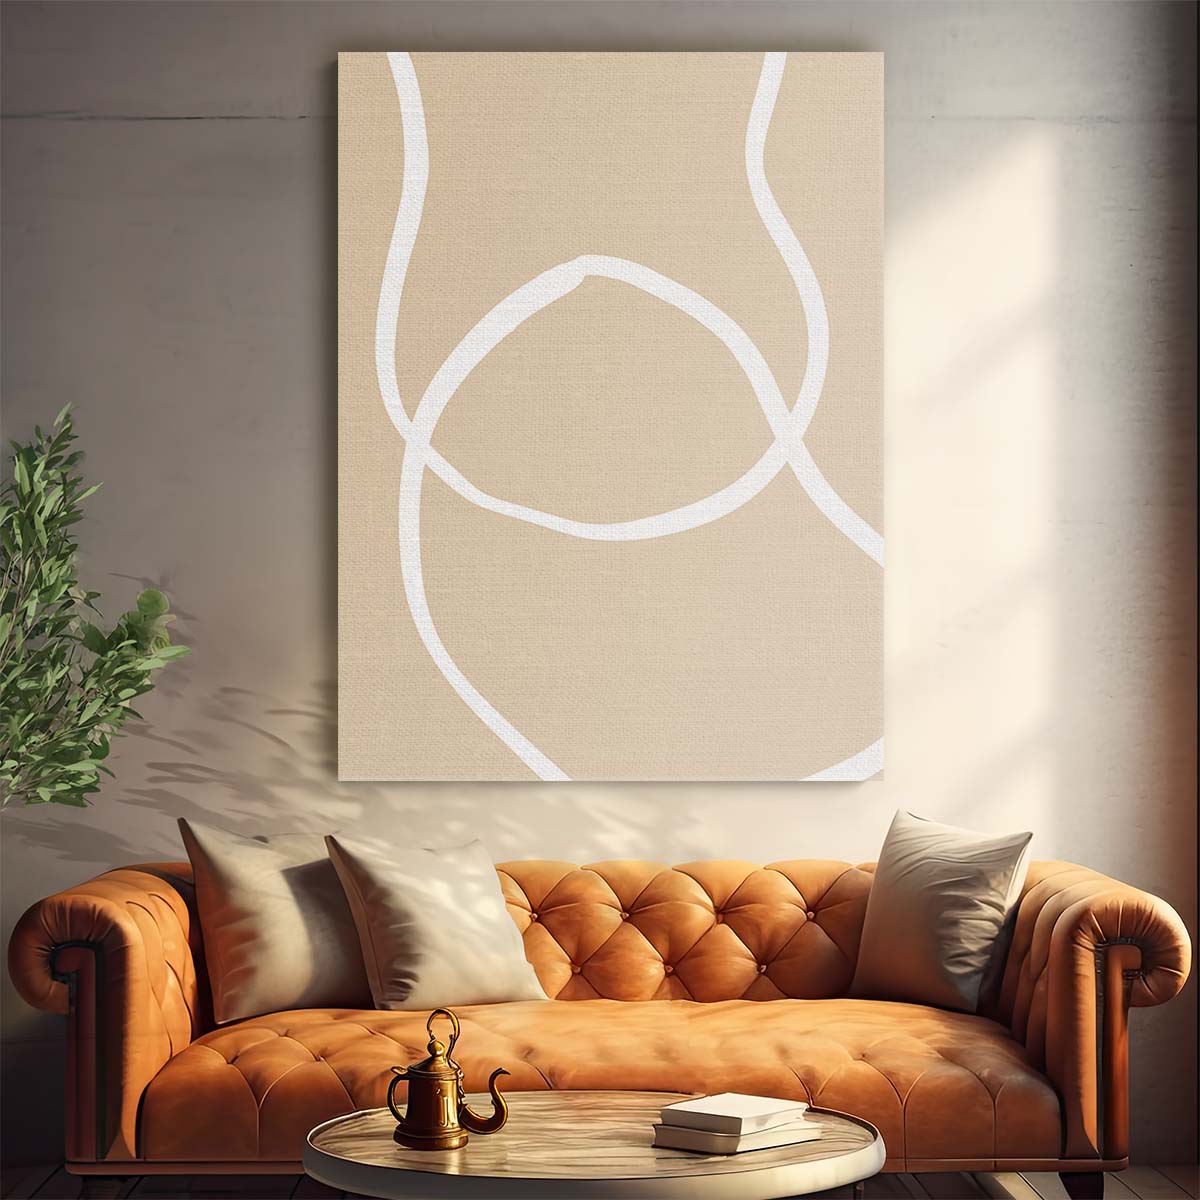 Beige Minimalist Line Art Illustration - Geometric Abstract Shapes by Luxuriance Designs, made in USA